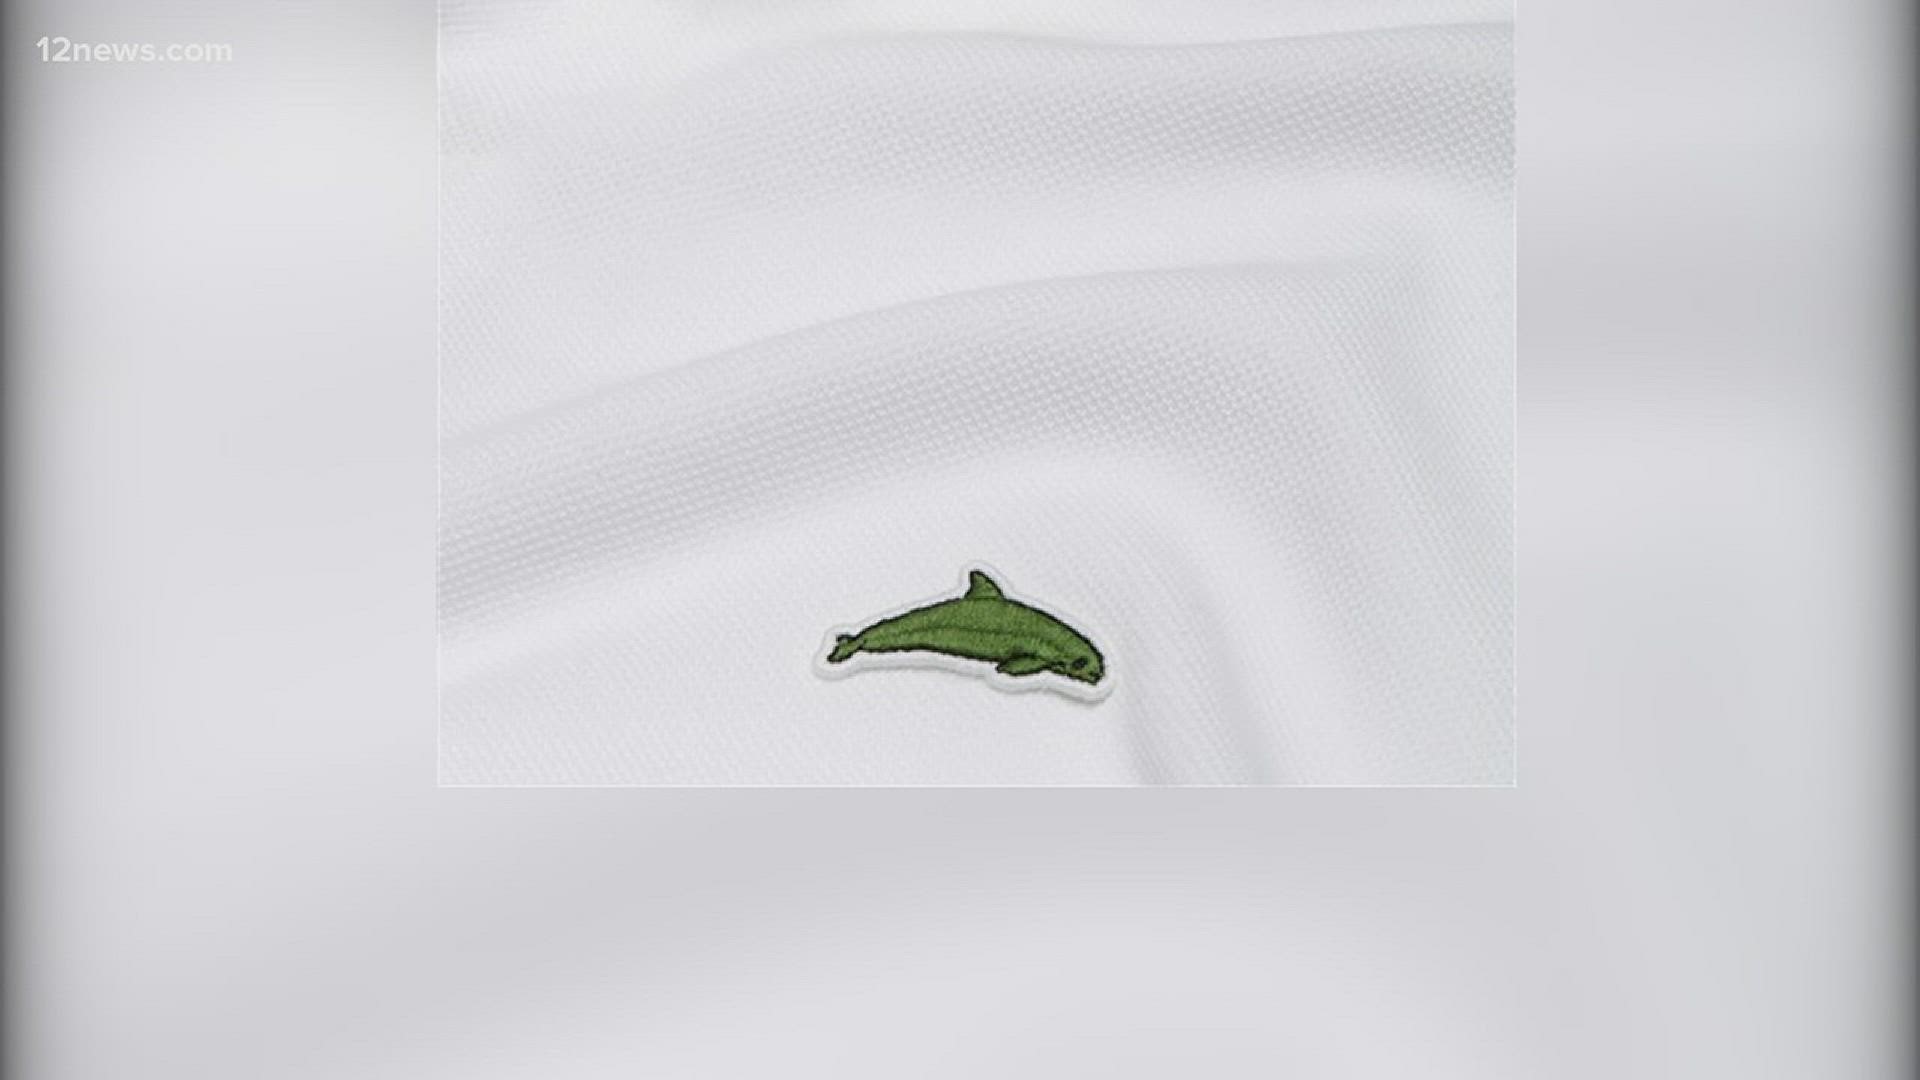 Lacoste releasing limited edition line of polos featuring 10 of the world's most endangered species. Proceeds will go to wildlife rescue organizations.